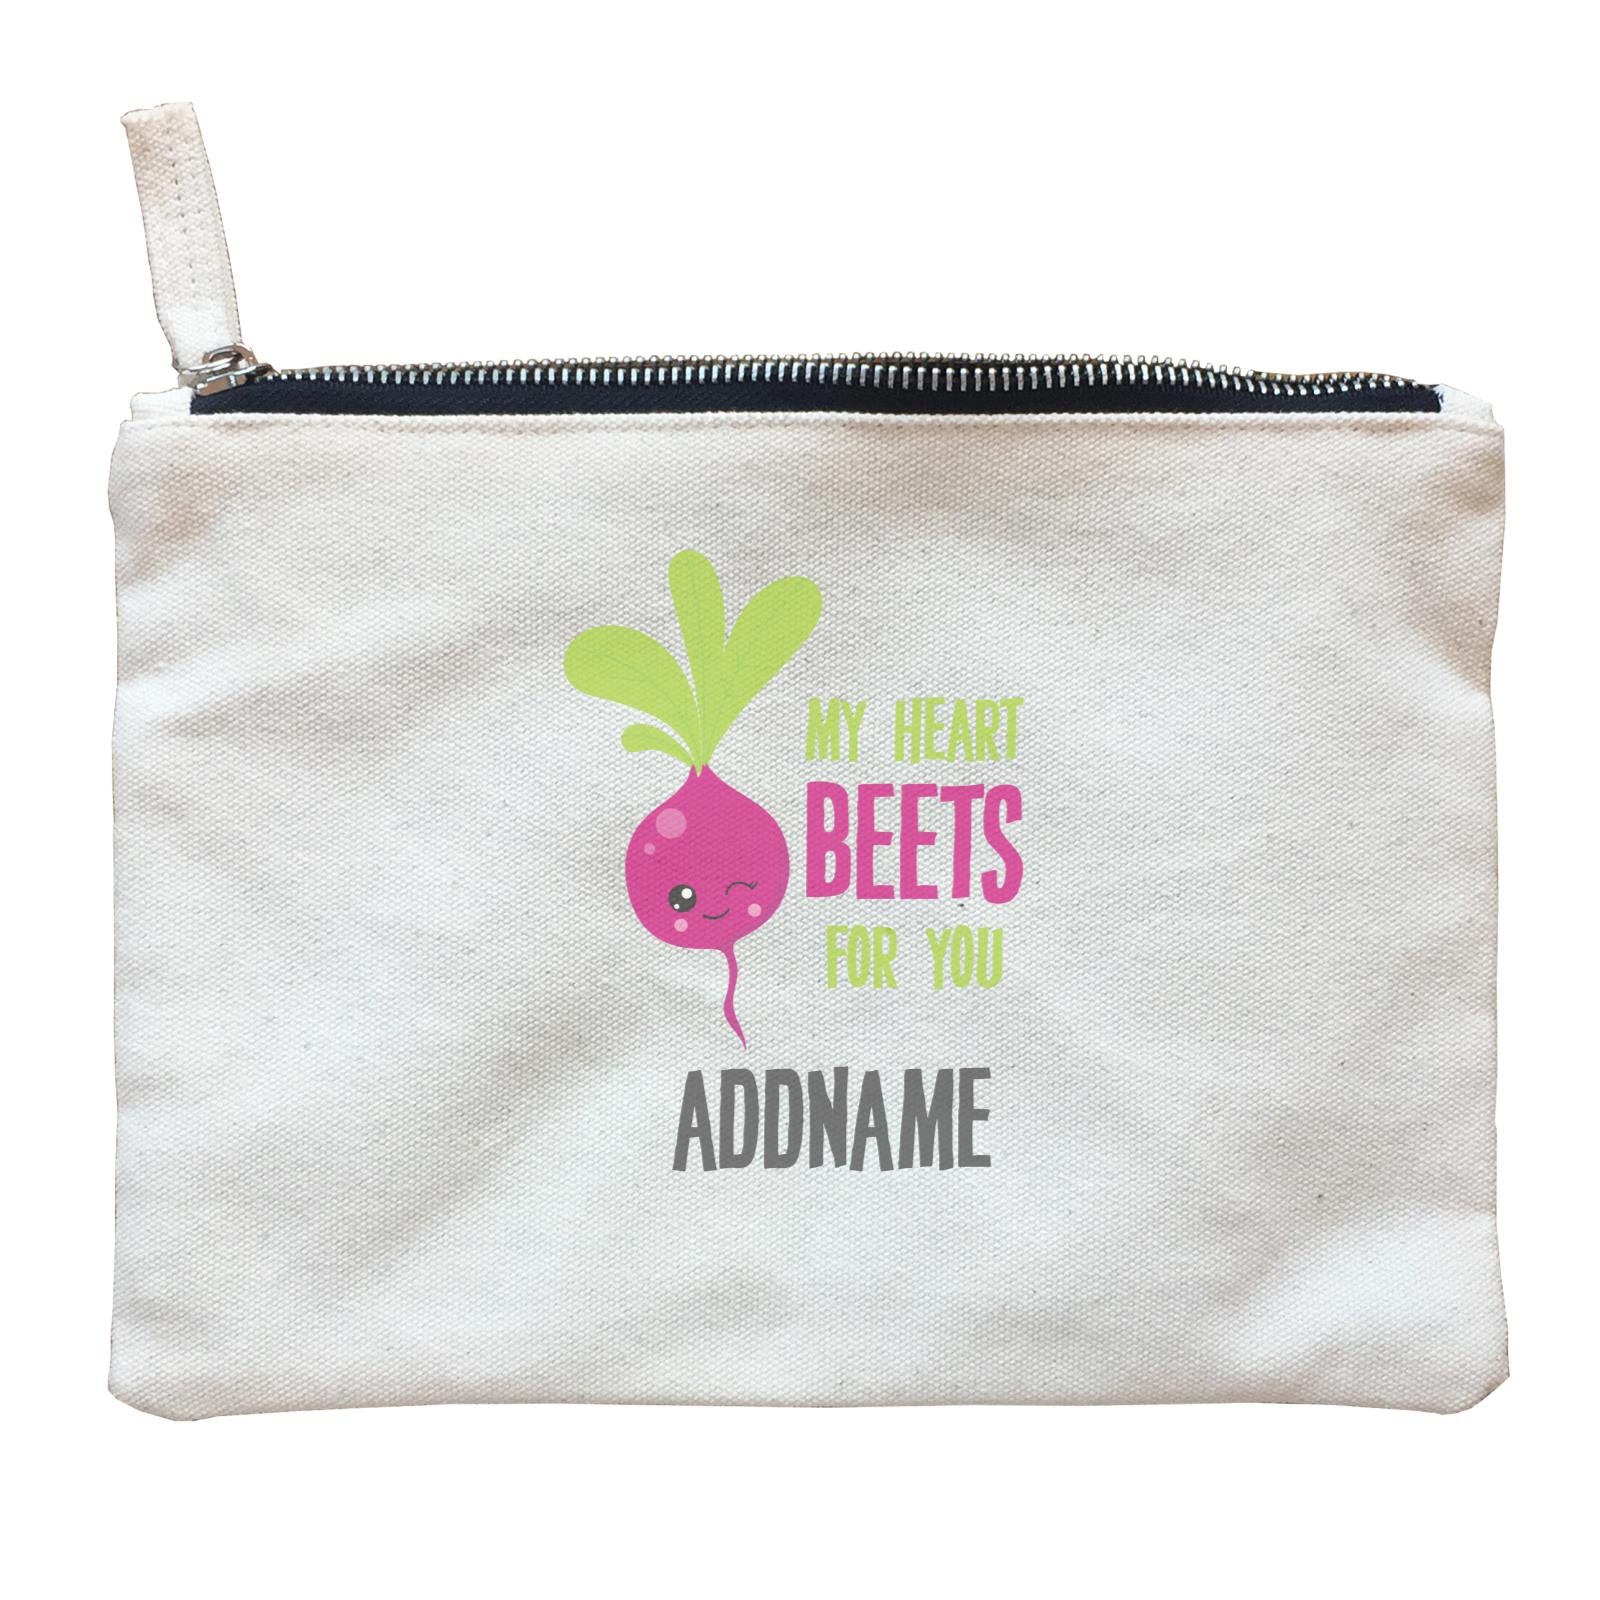 Love Food Puns My Heart Beets For You Addname Zipper Pouch